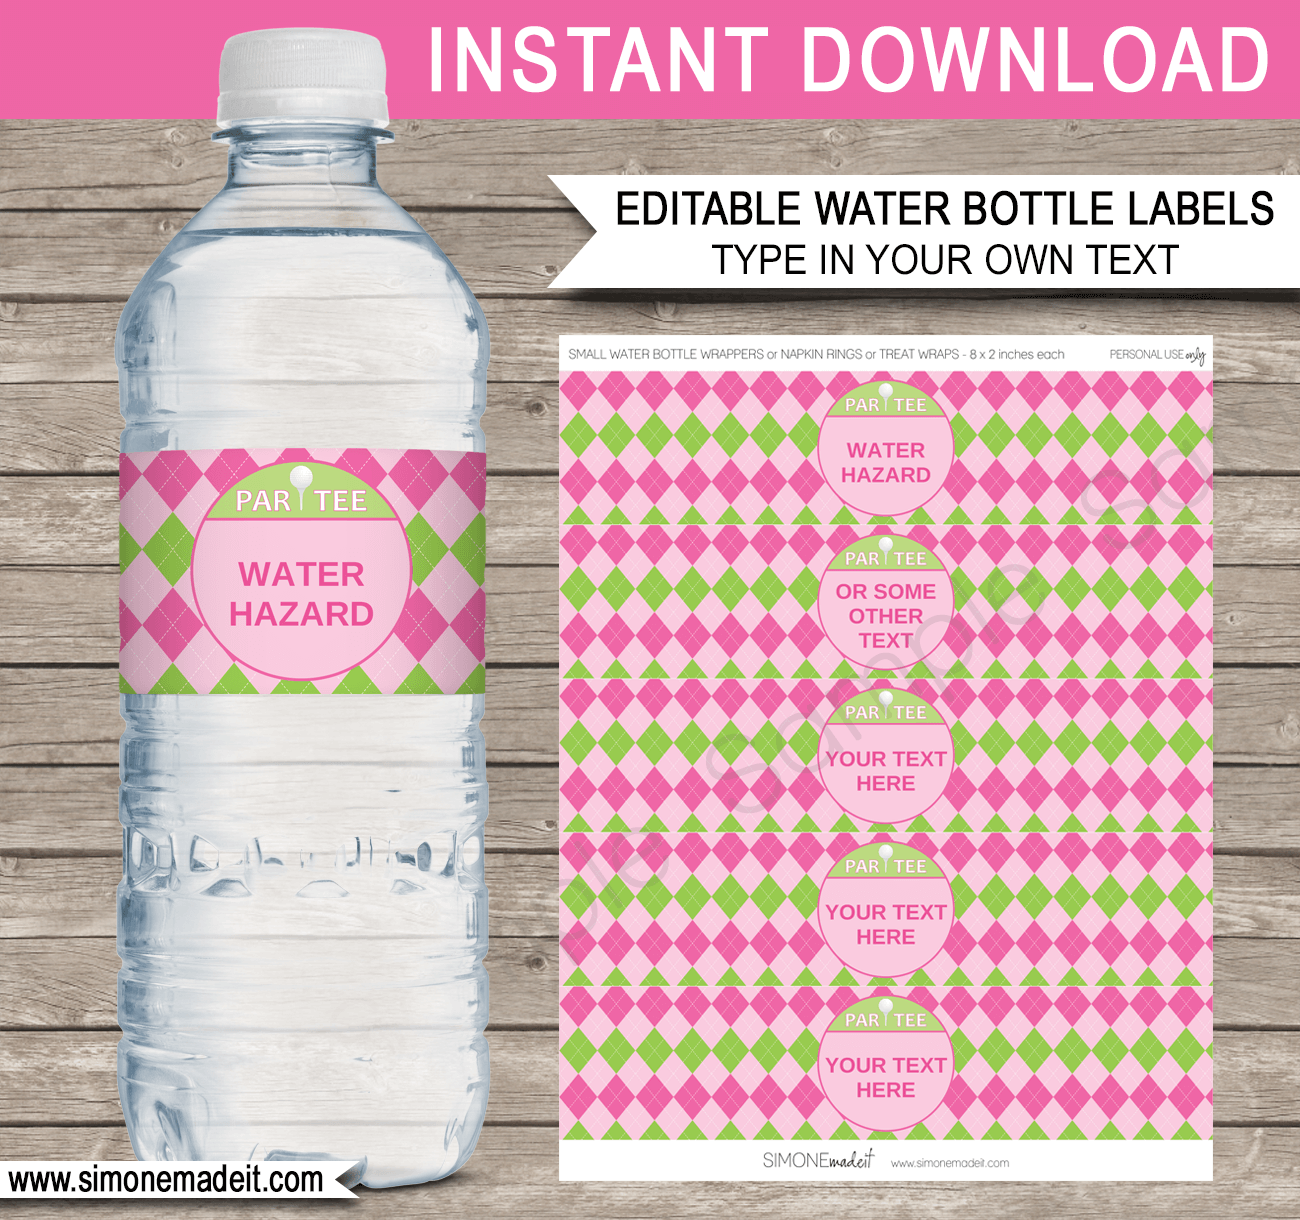 Printable Ladies Golf Water Bottle Labels Template | Retirement Party, Birthday Party Decorations | DIY Editable Text | $3.00 INSTANT DOWNLOAD via SIMONEmadeit.com